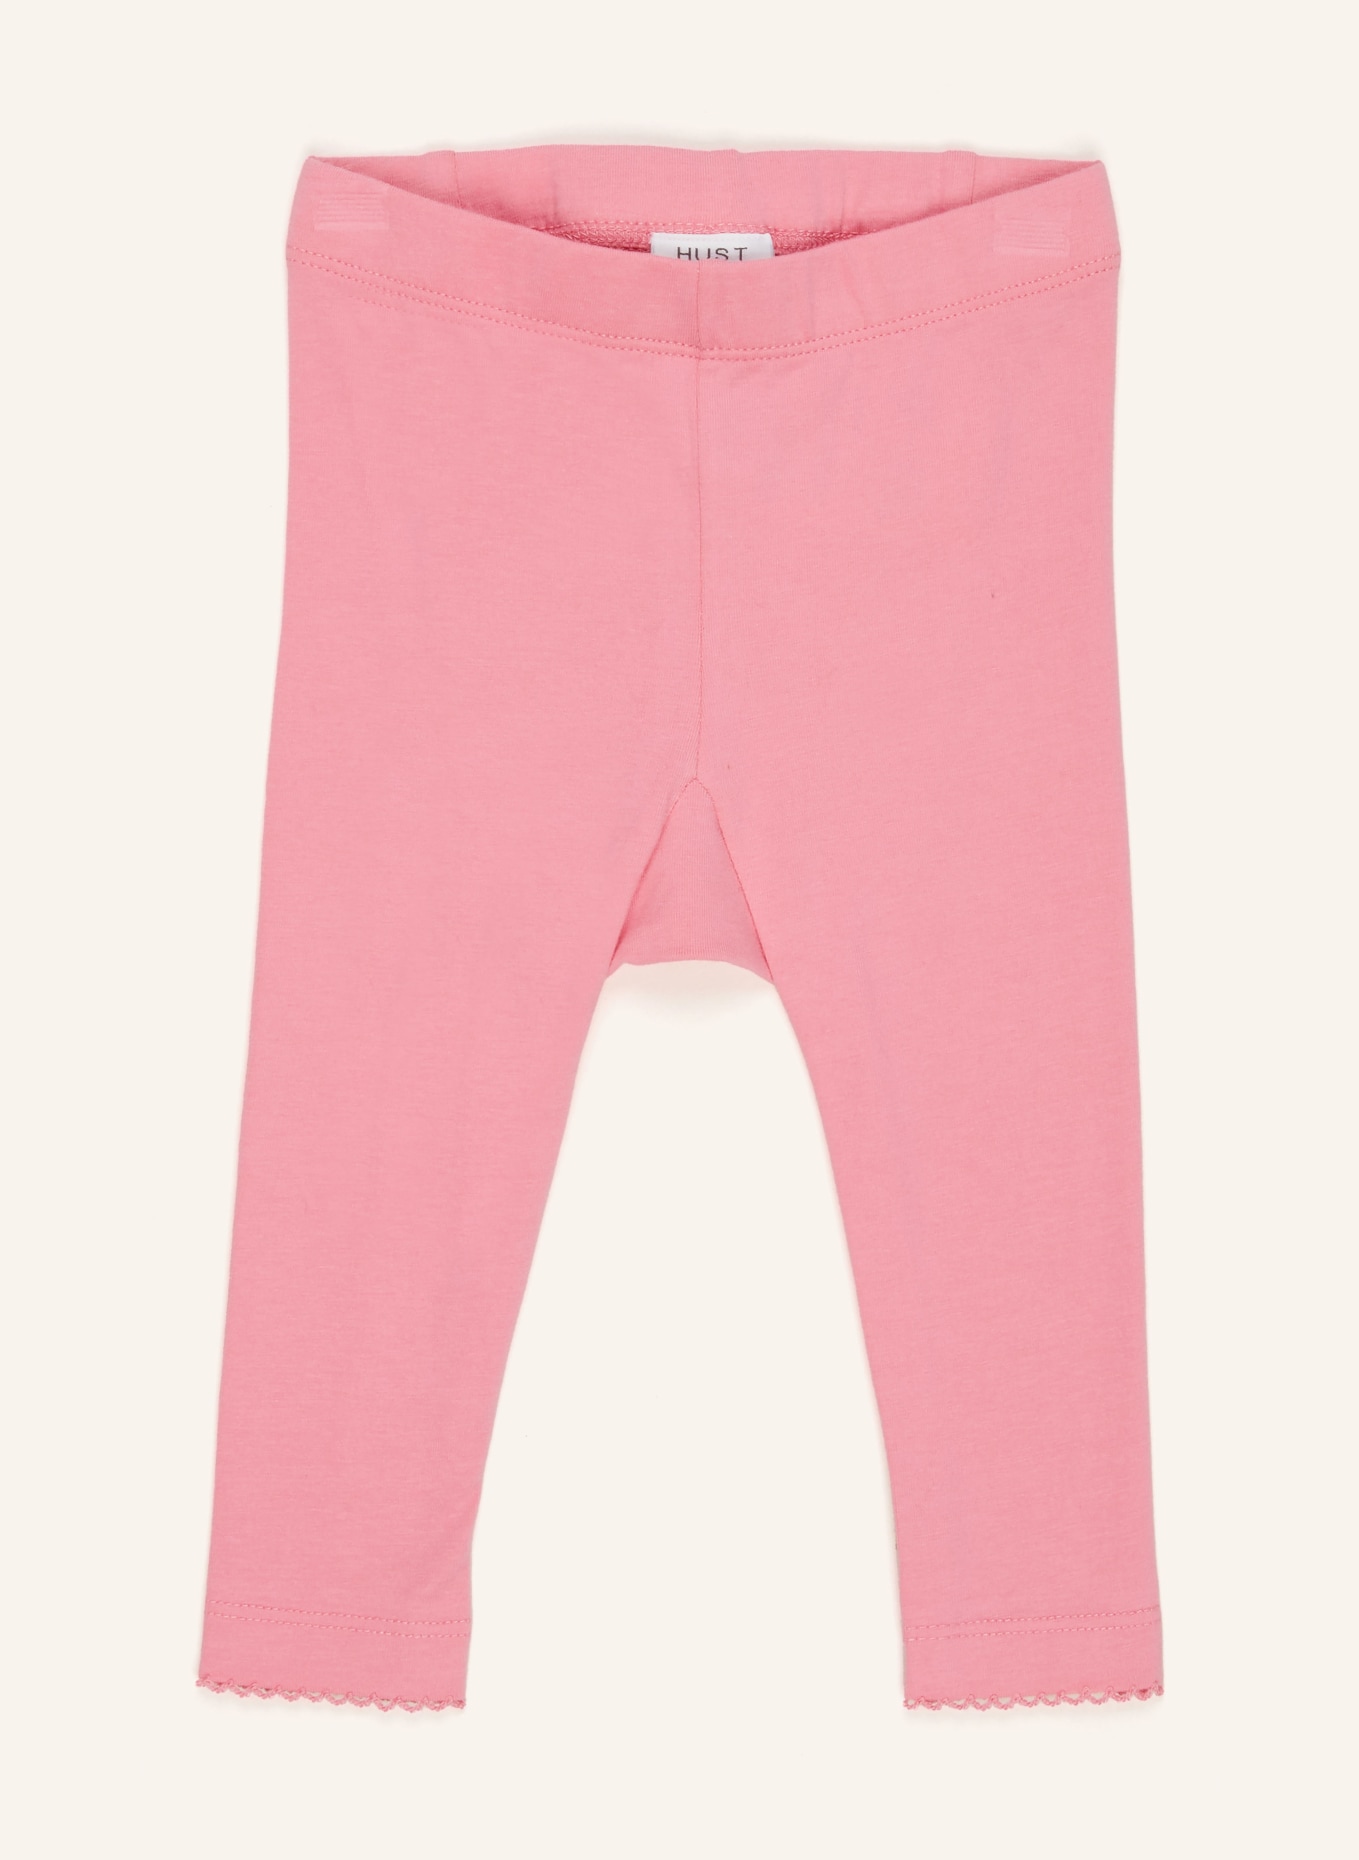 HUST and CLAIRE Leggings LALINE, Farbe: PINK (Bild 1)